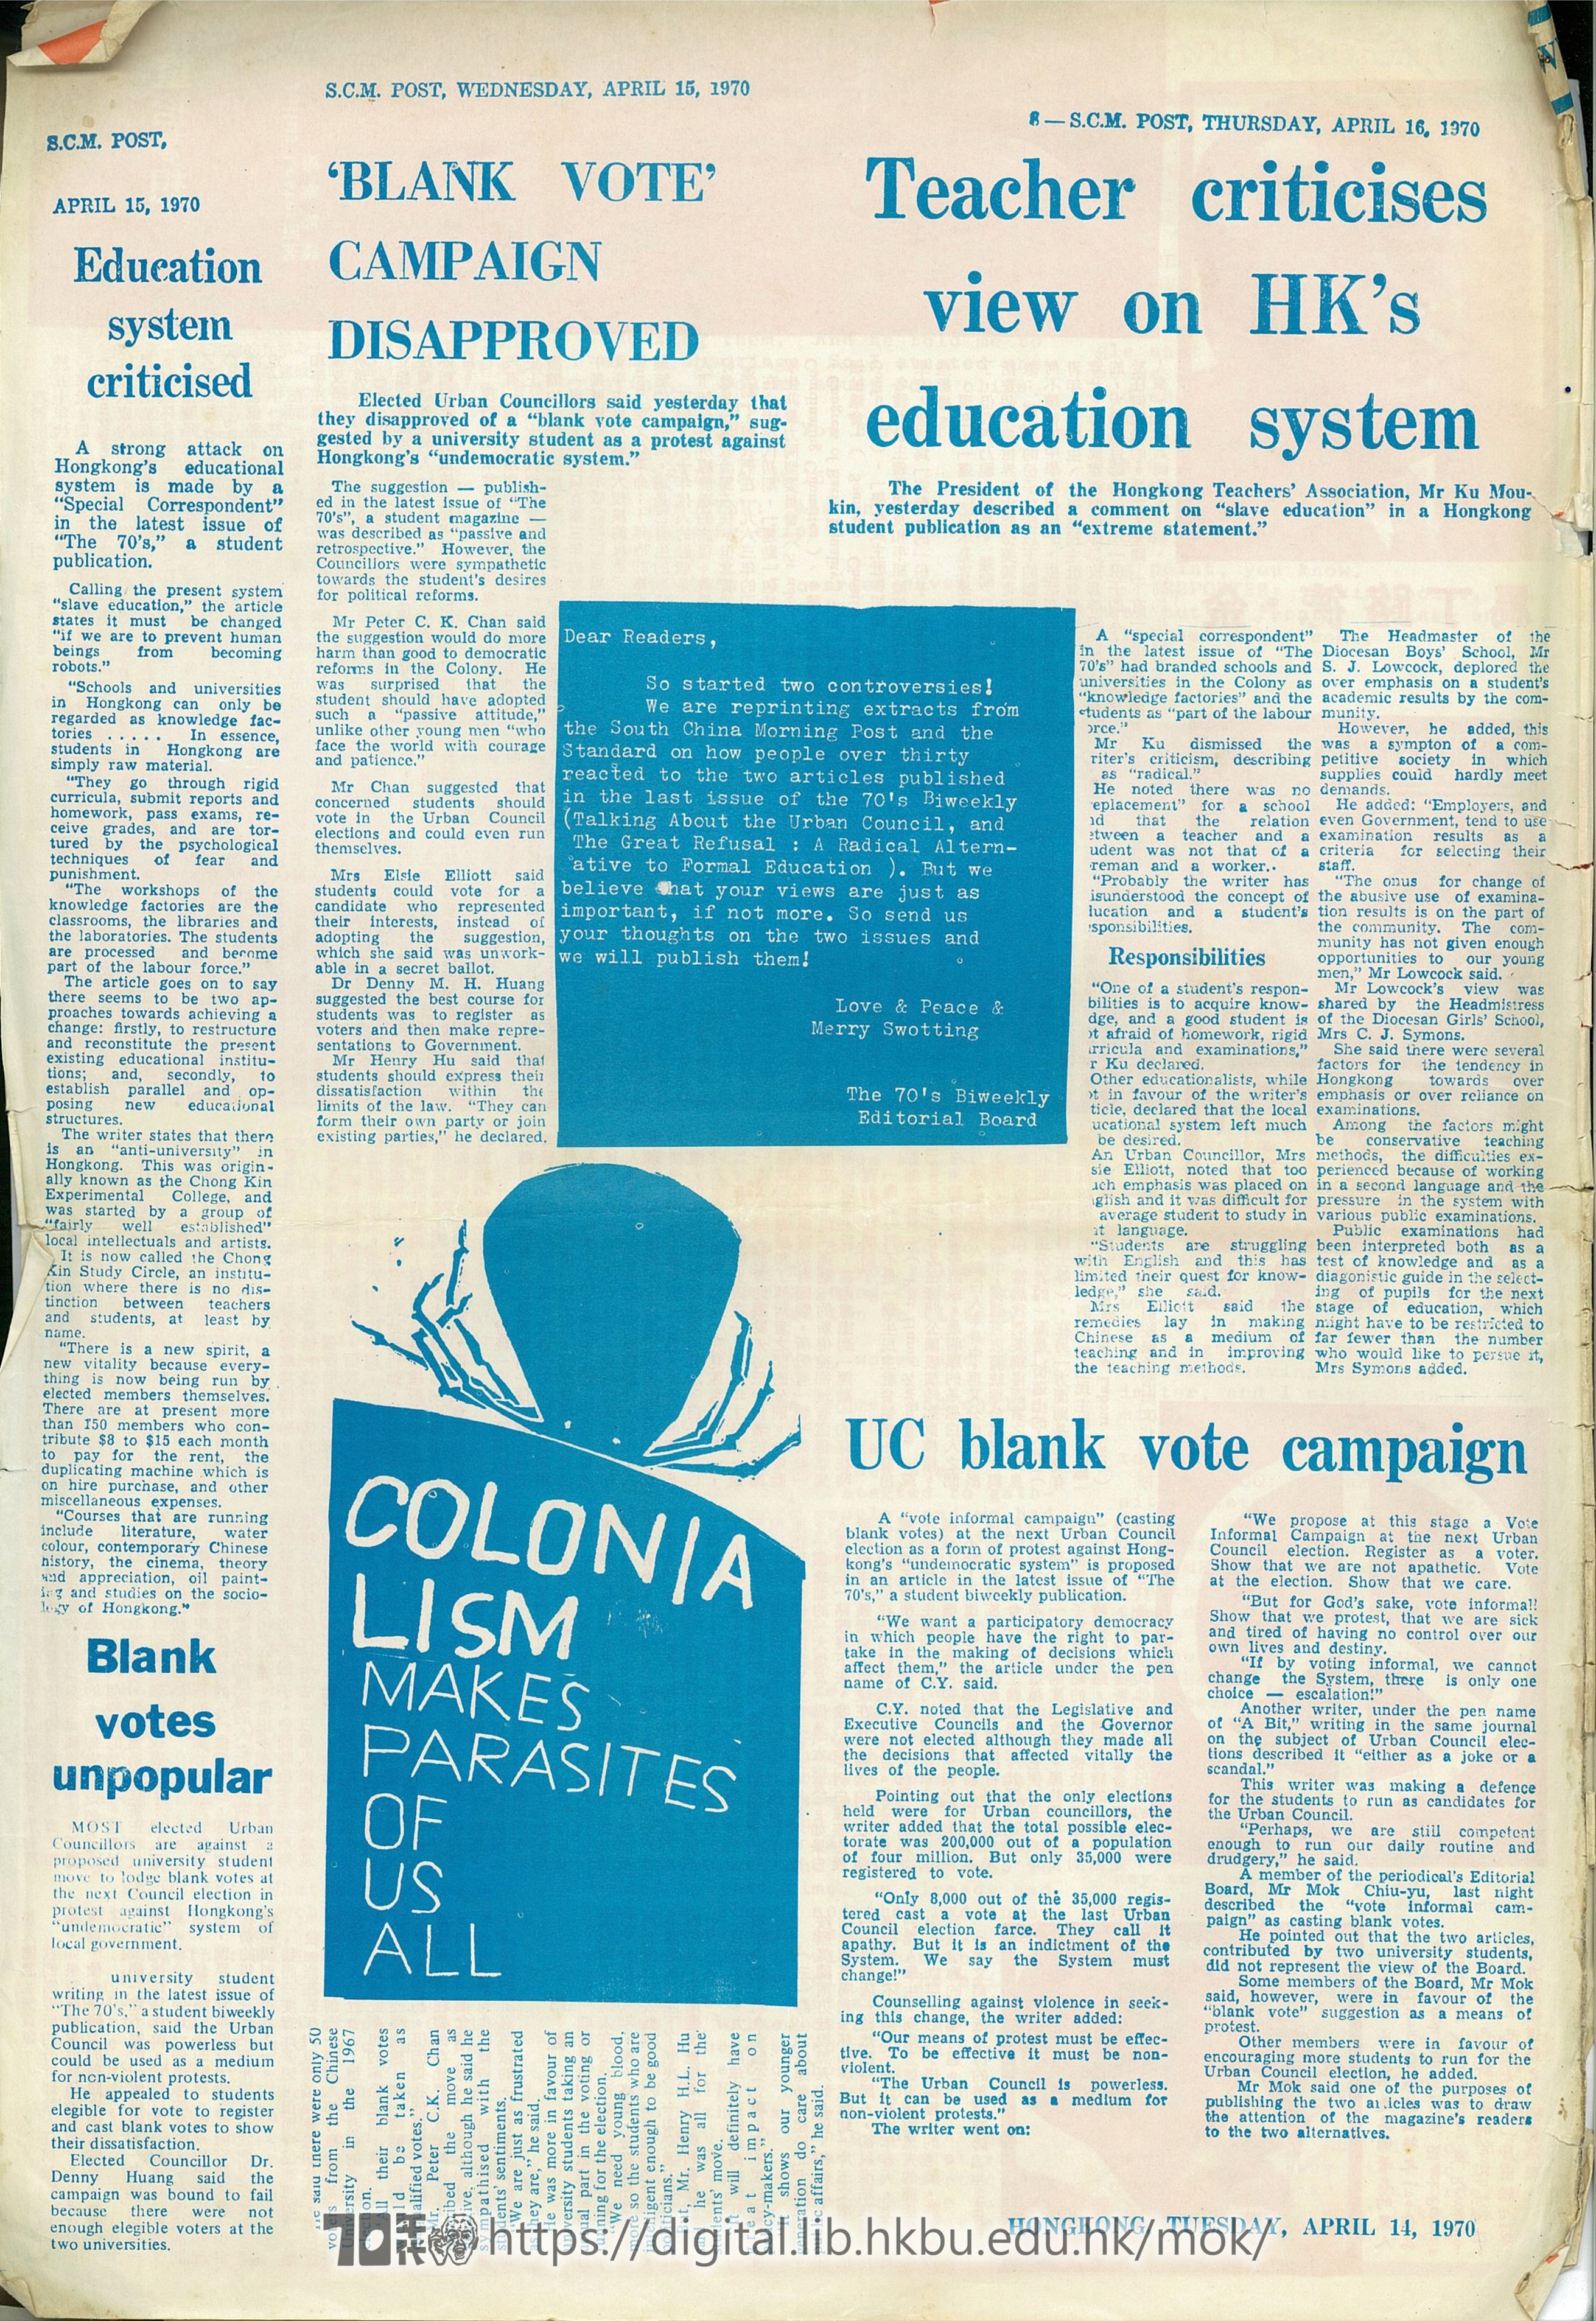  7 Education system criticised S.C.M. POST APRIL,15,1970 